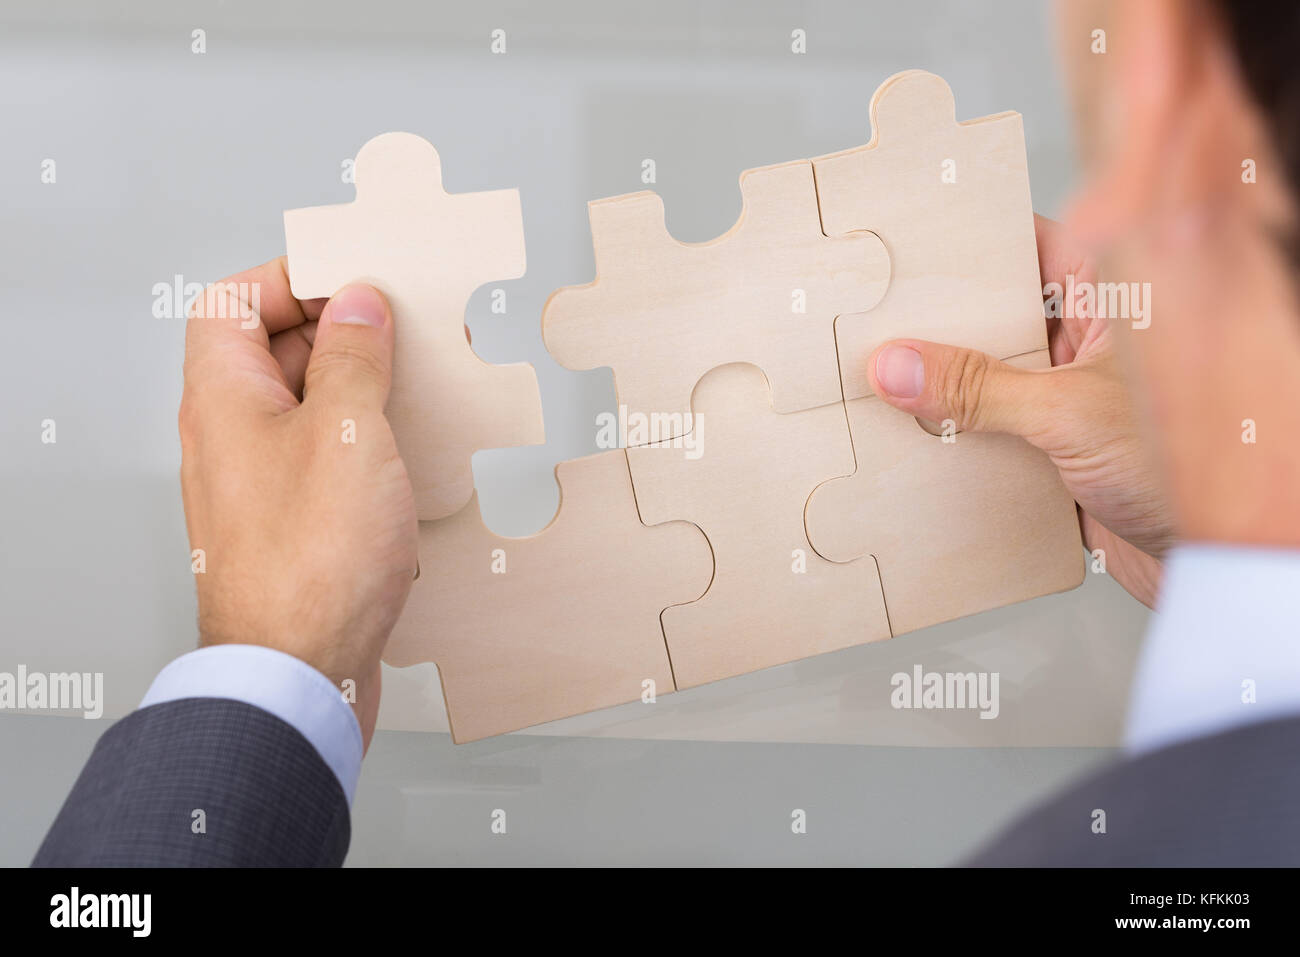 Businessman assembling jigsaw puzzle. Over the shoulder view Stock Photo